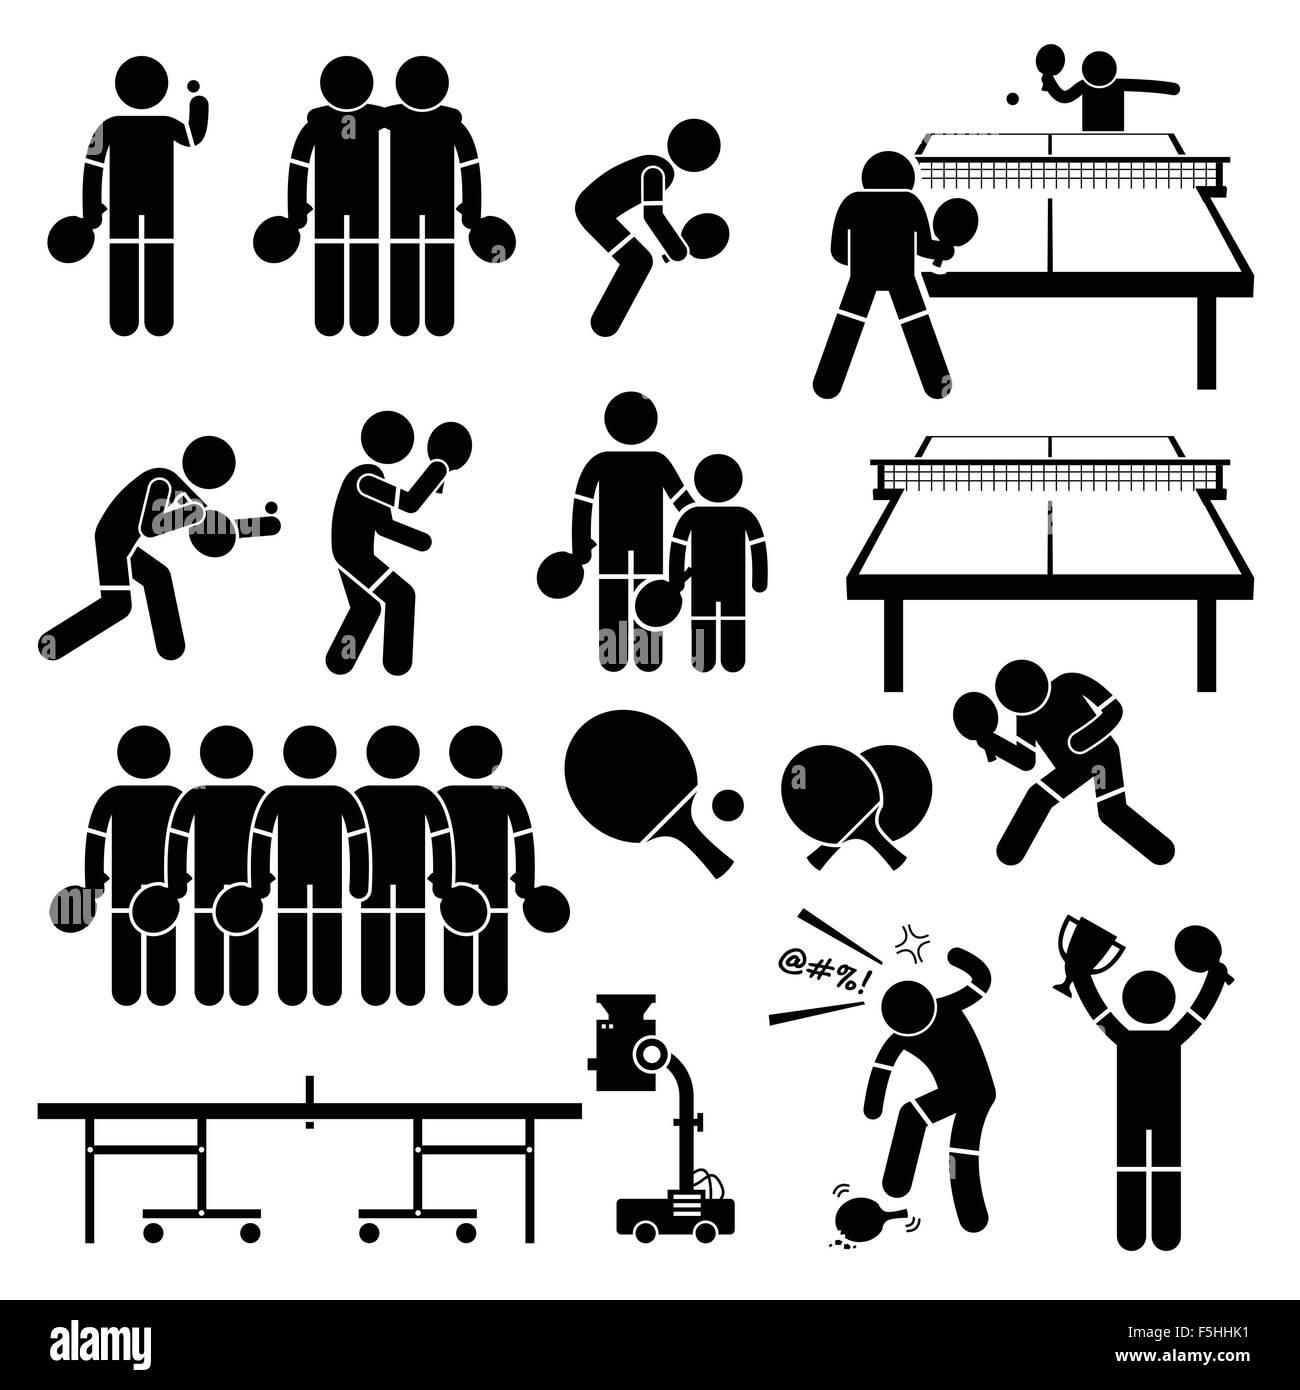 Table Tennis Player Actions Poses Stick Figure Pictogram Icons Stock Vector